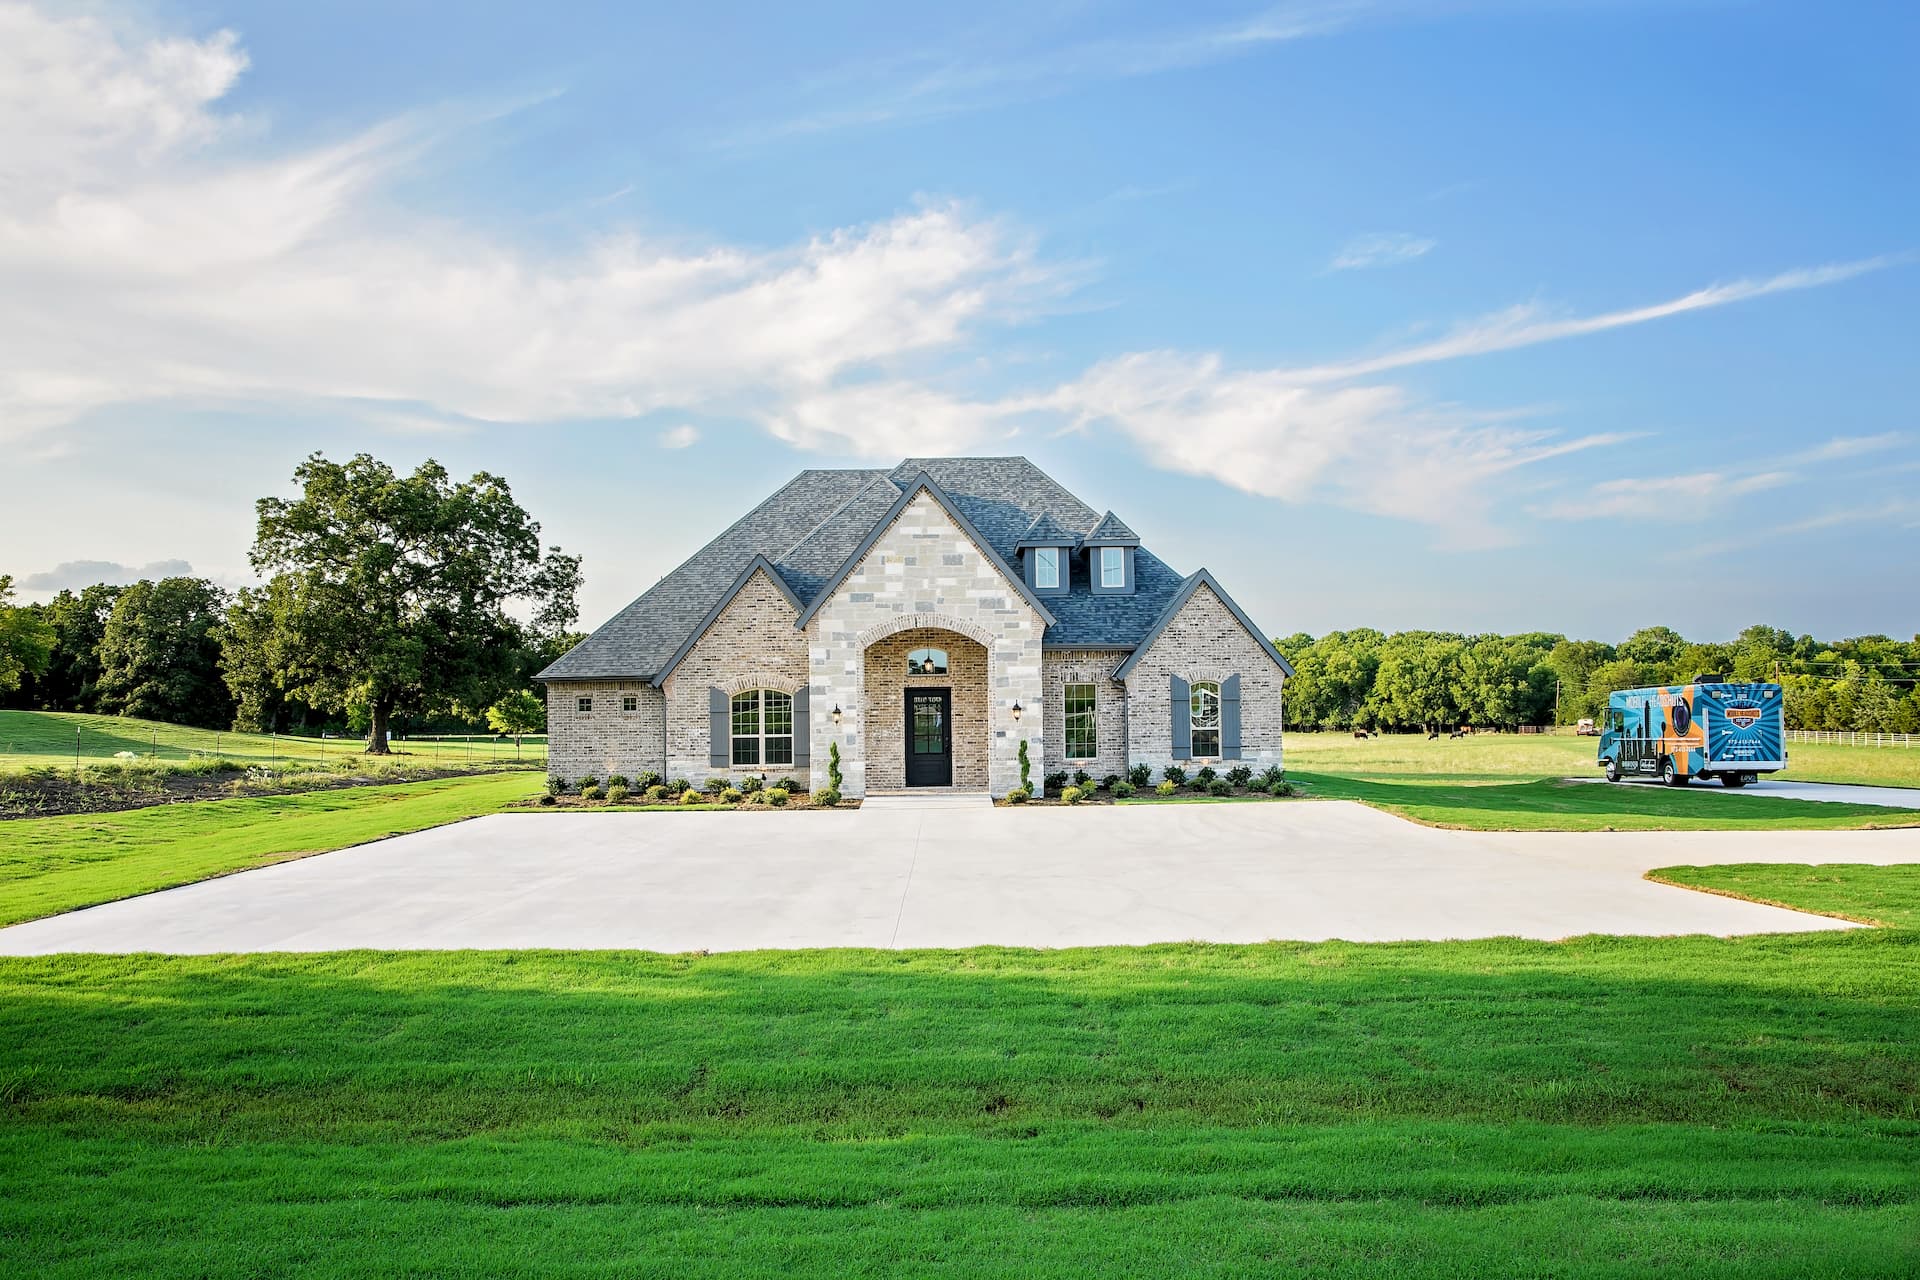 Professional Real Estate Photography - Natalie Roberson Photography